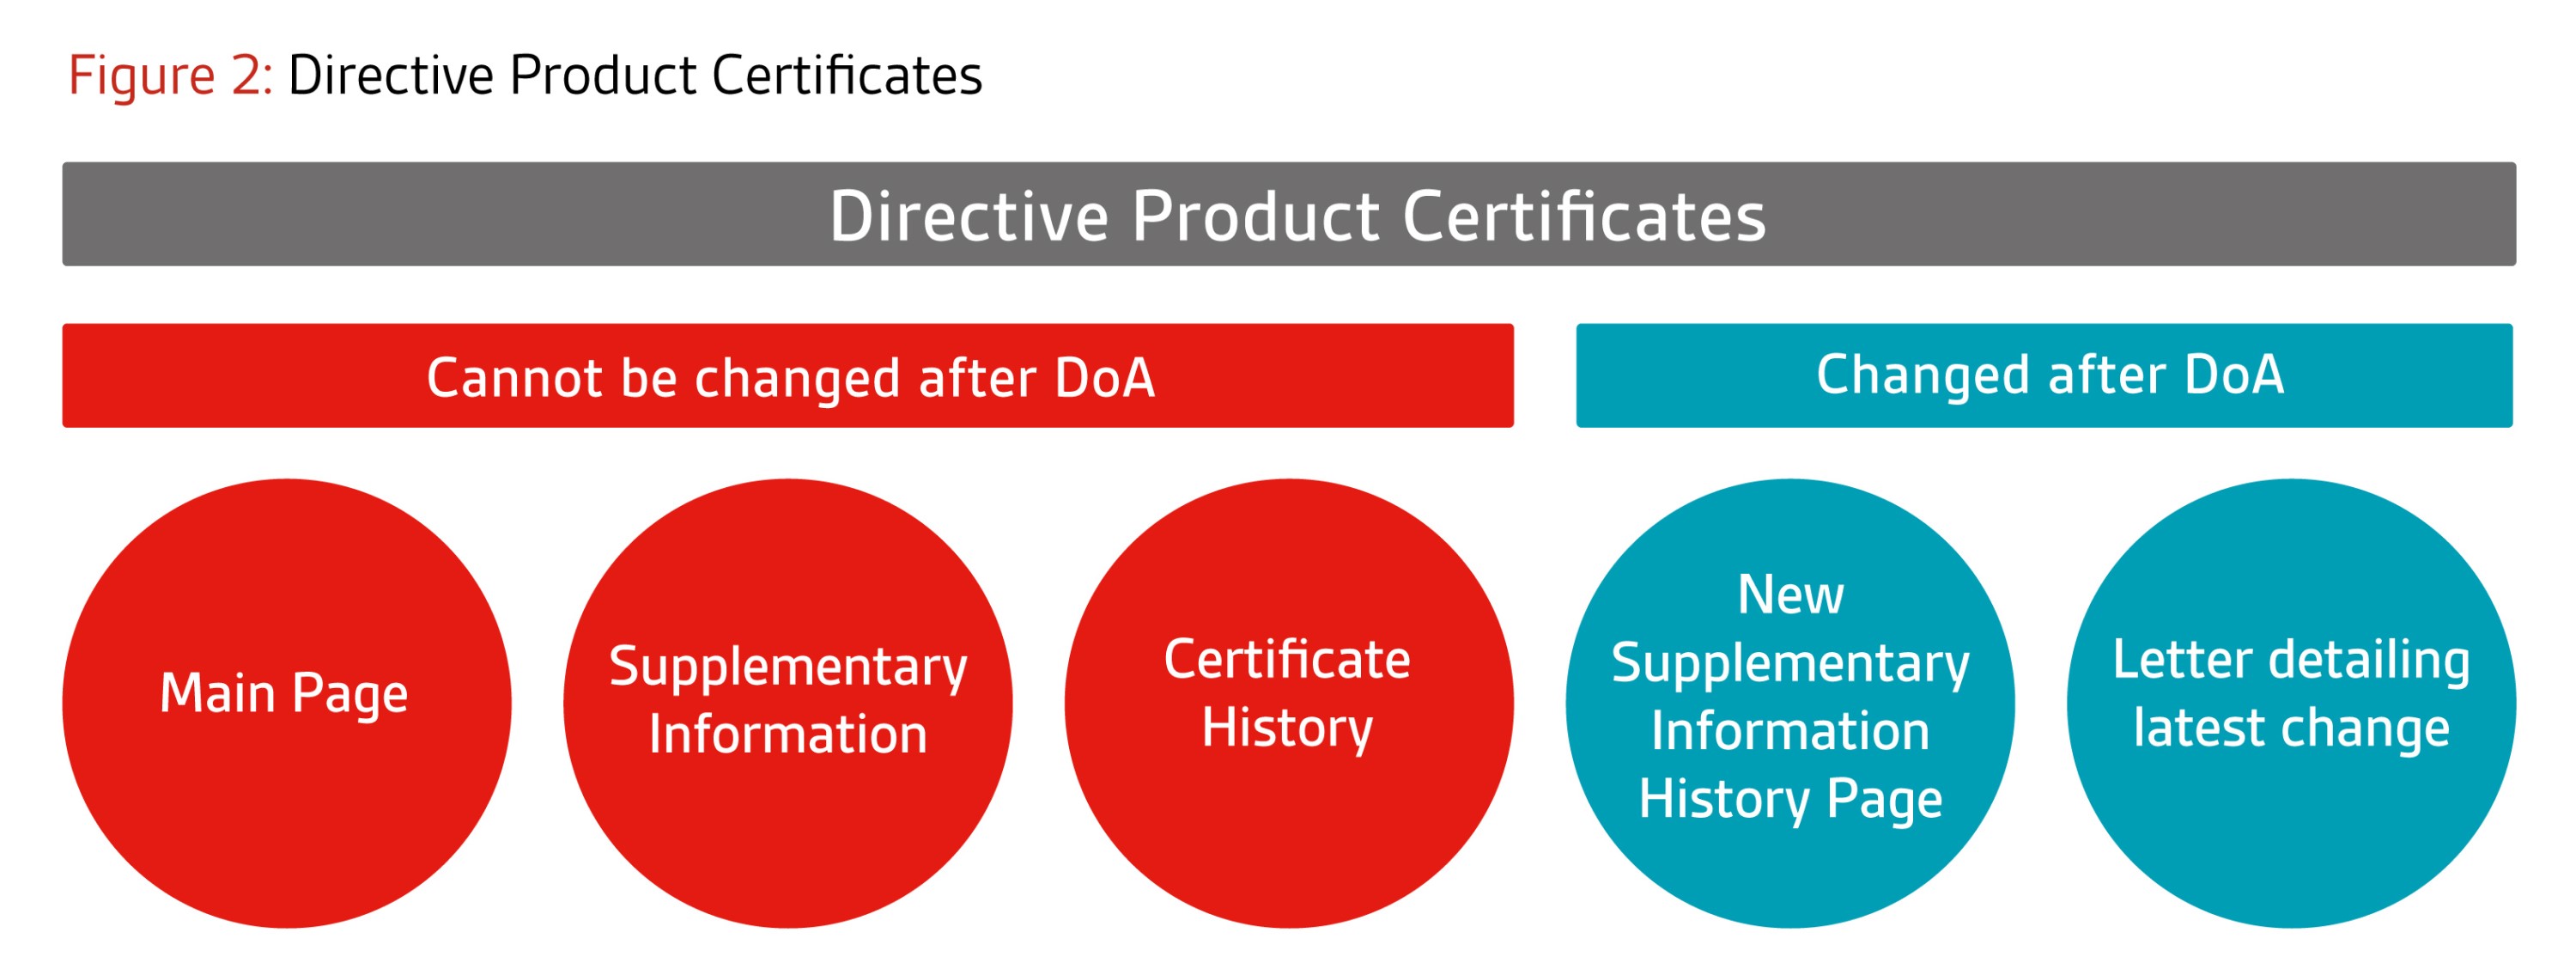 Directive Product Certificates